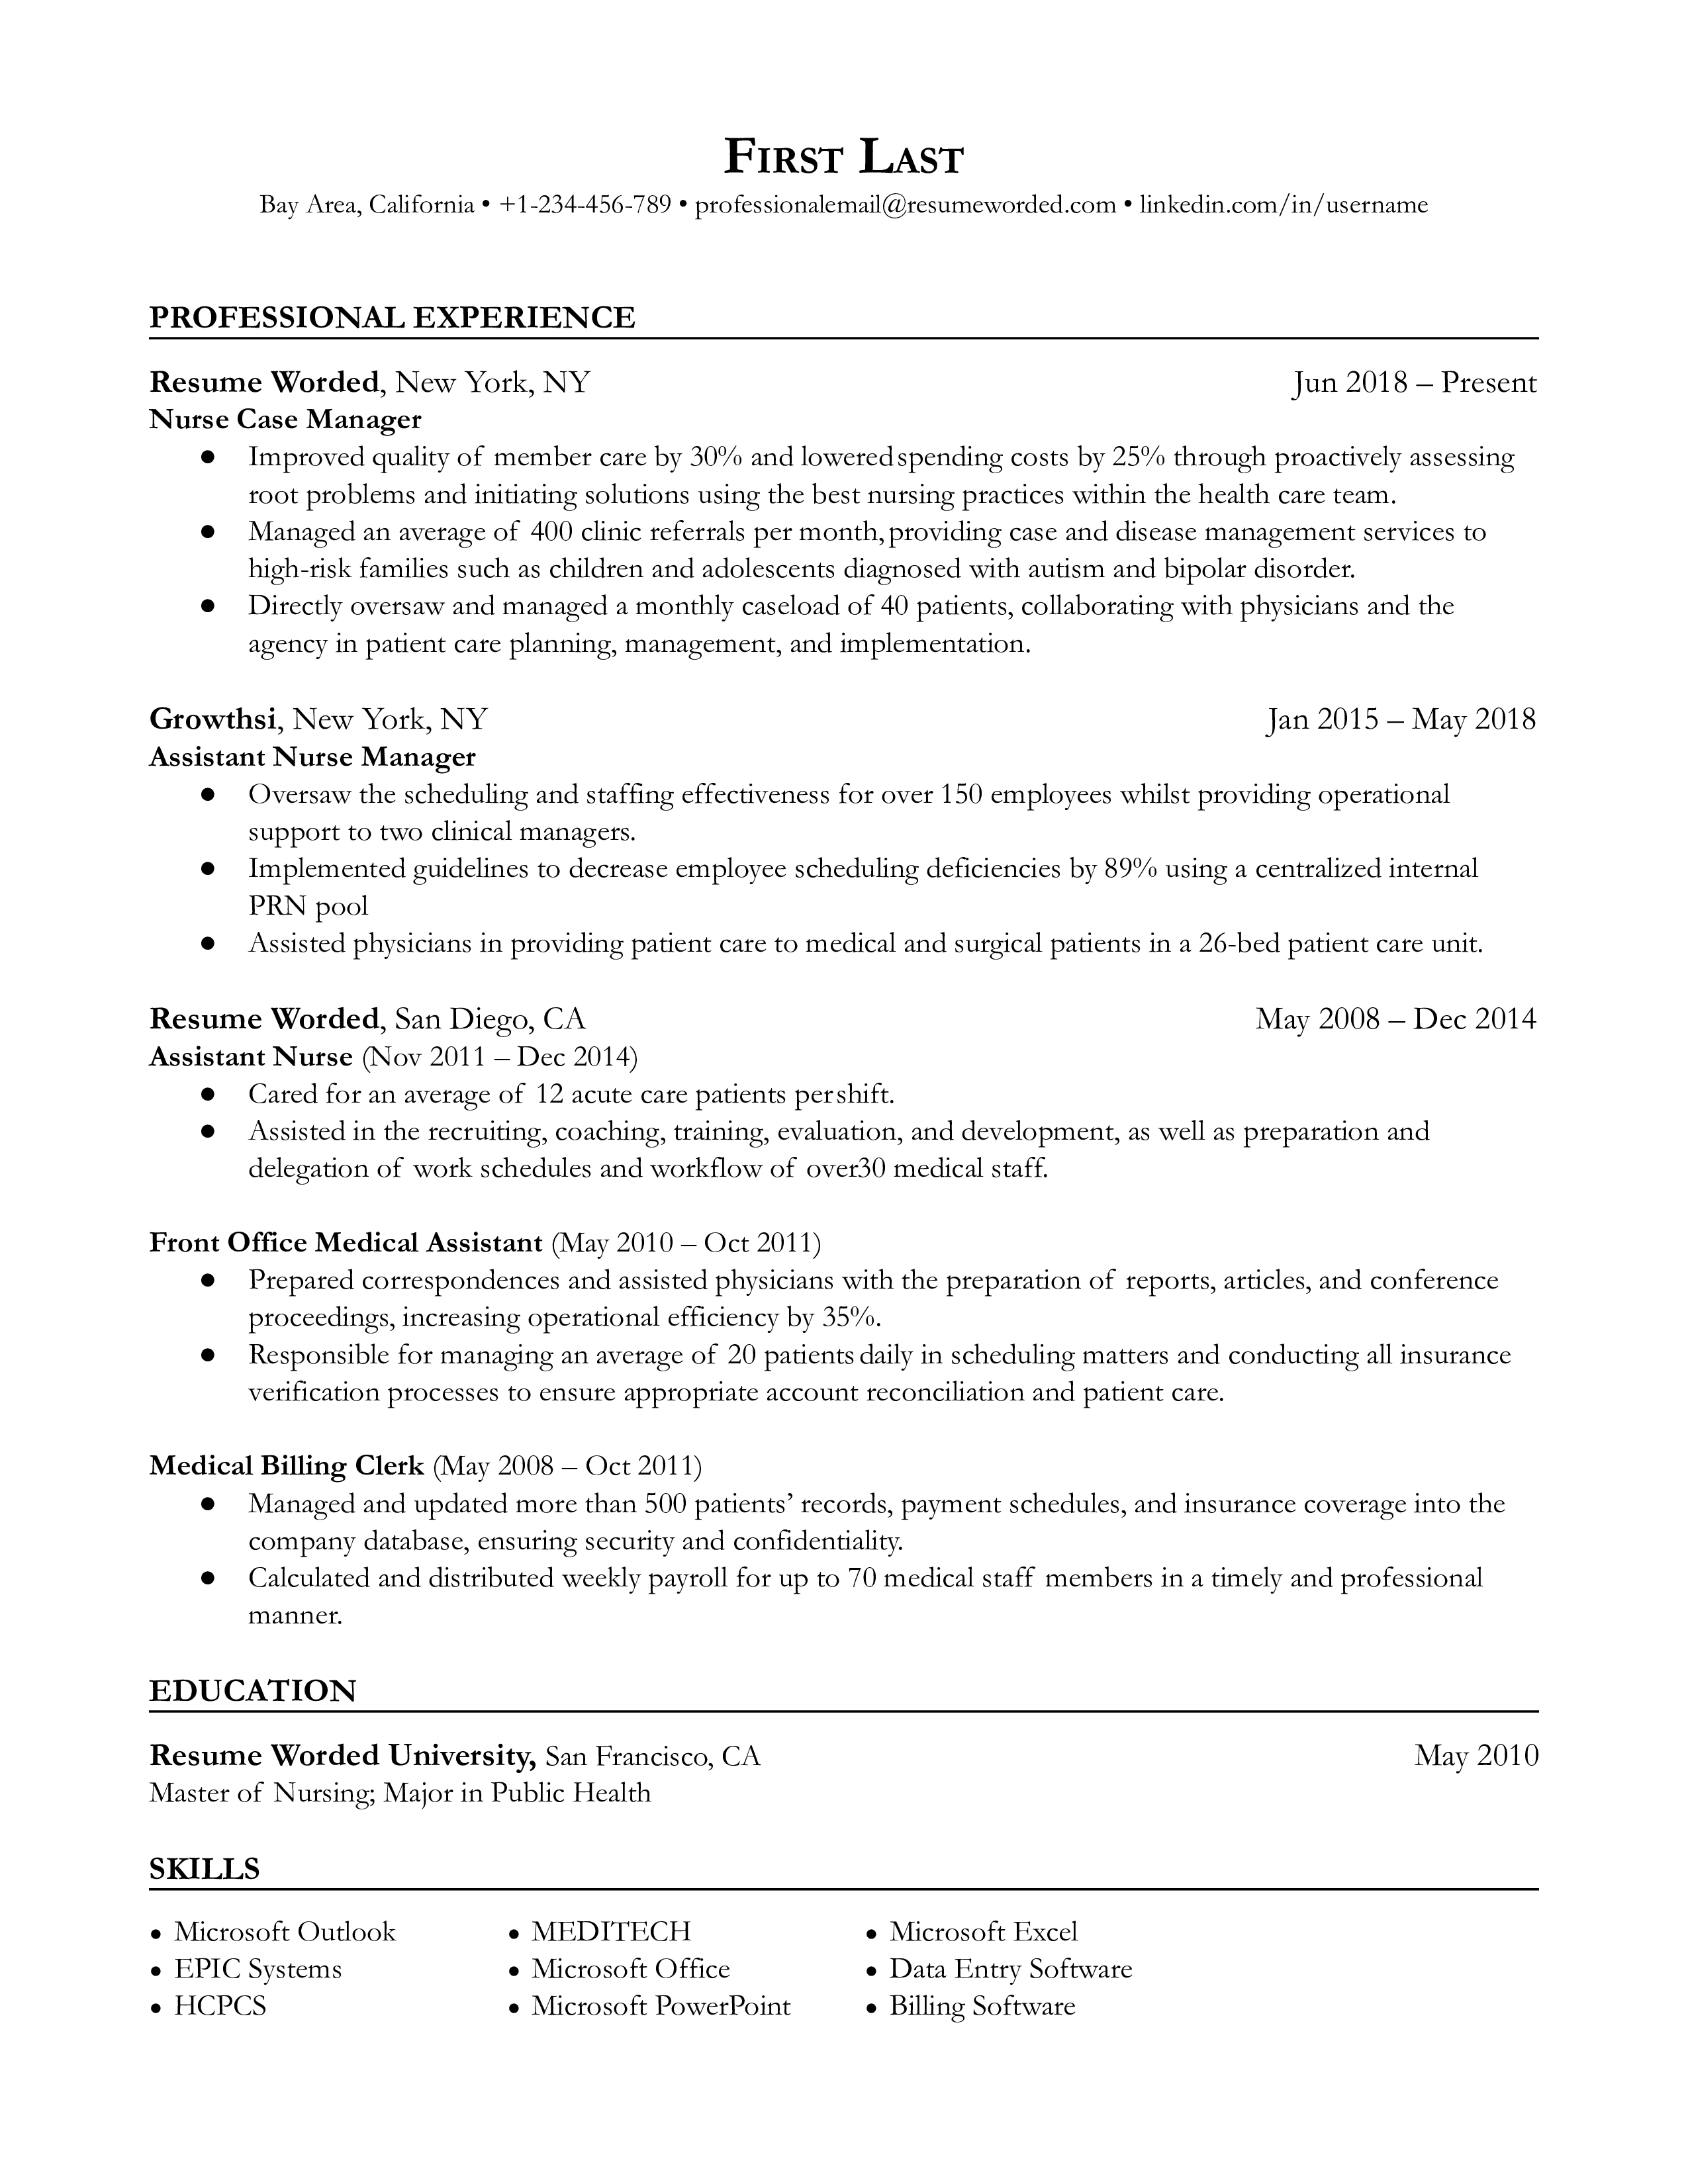 Nurse case manager resume template sample using hard numbers and metrics to highlight key skills